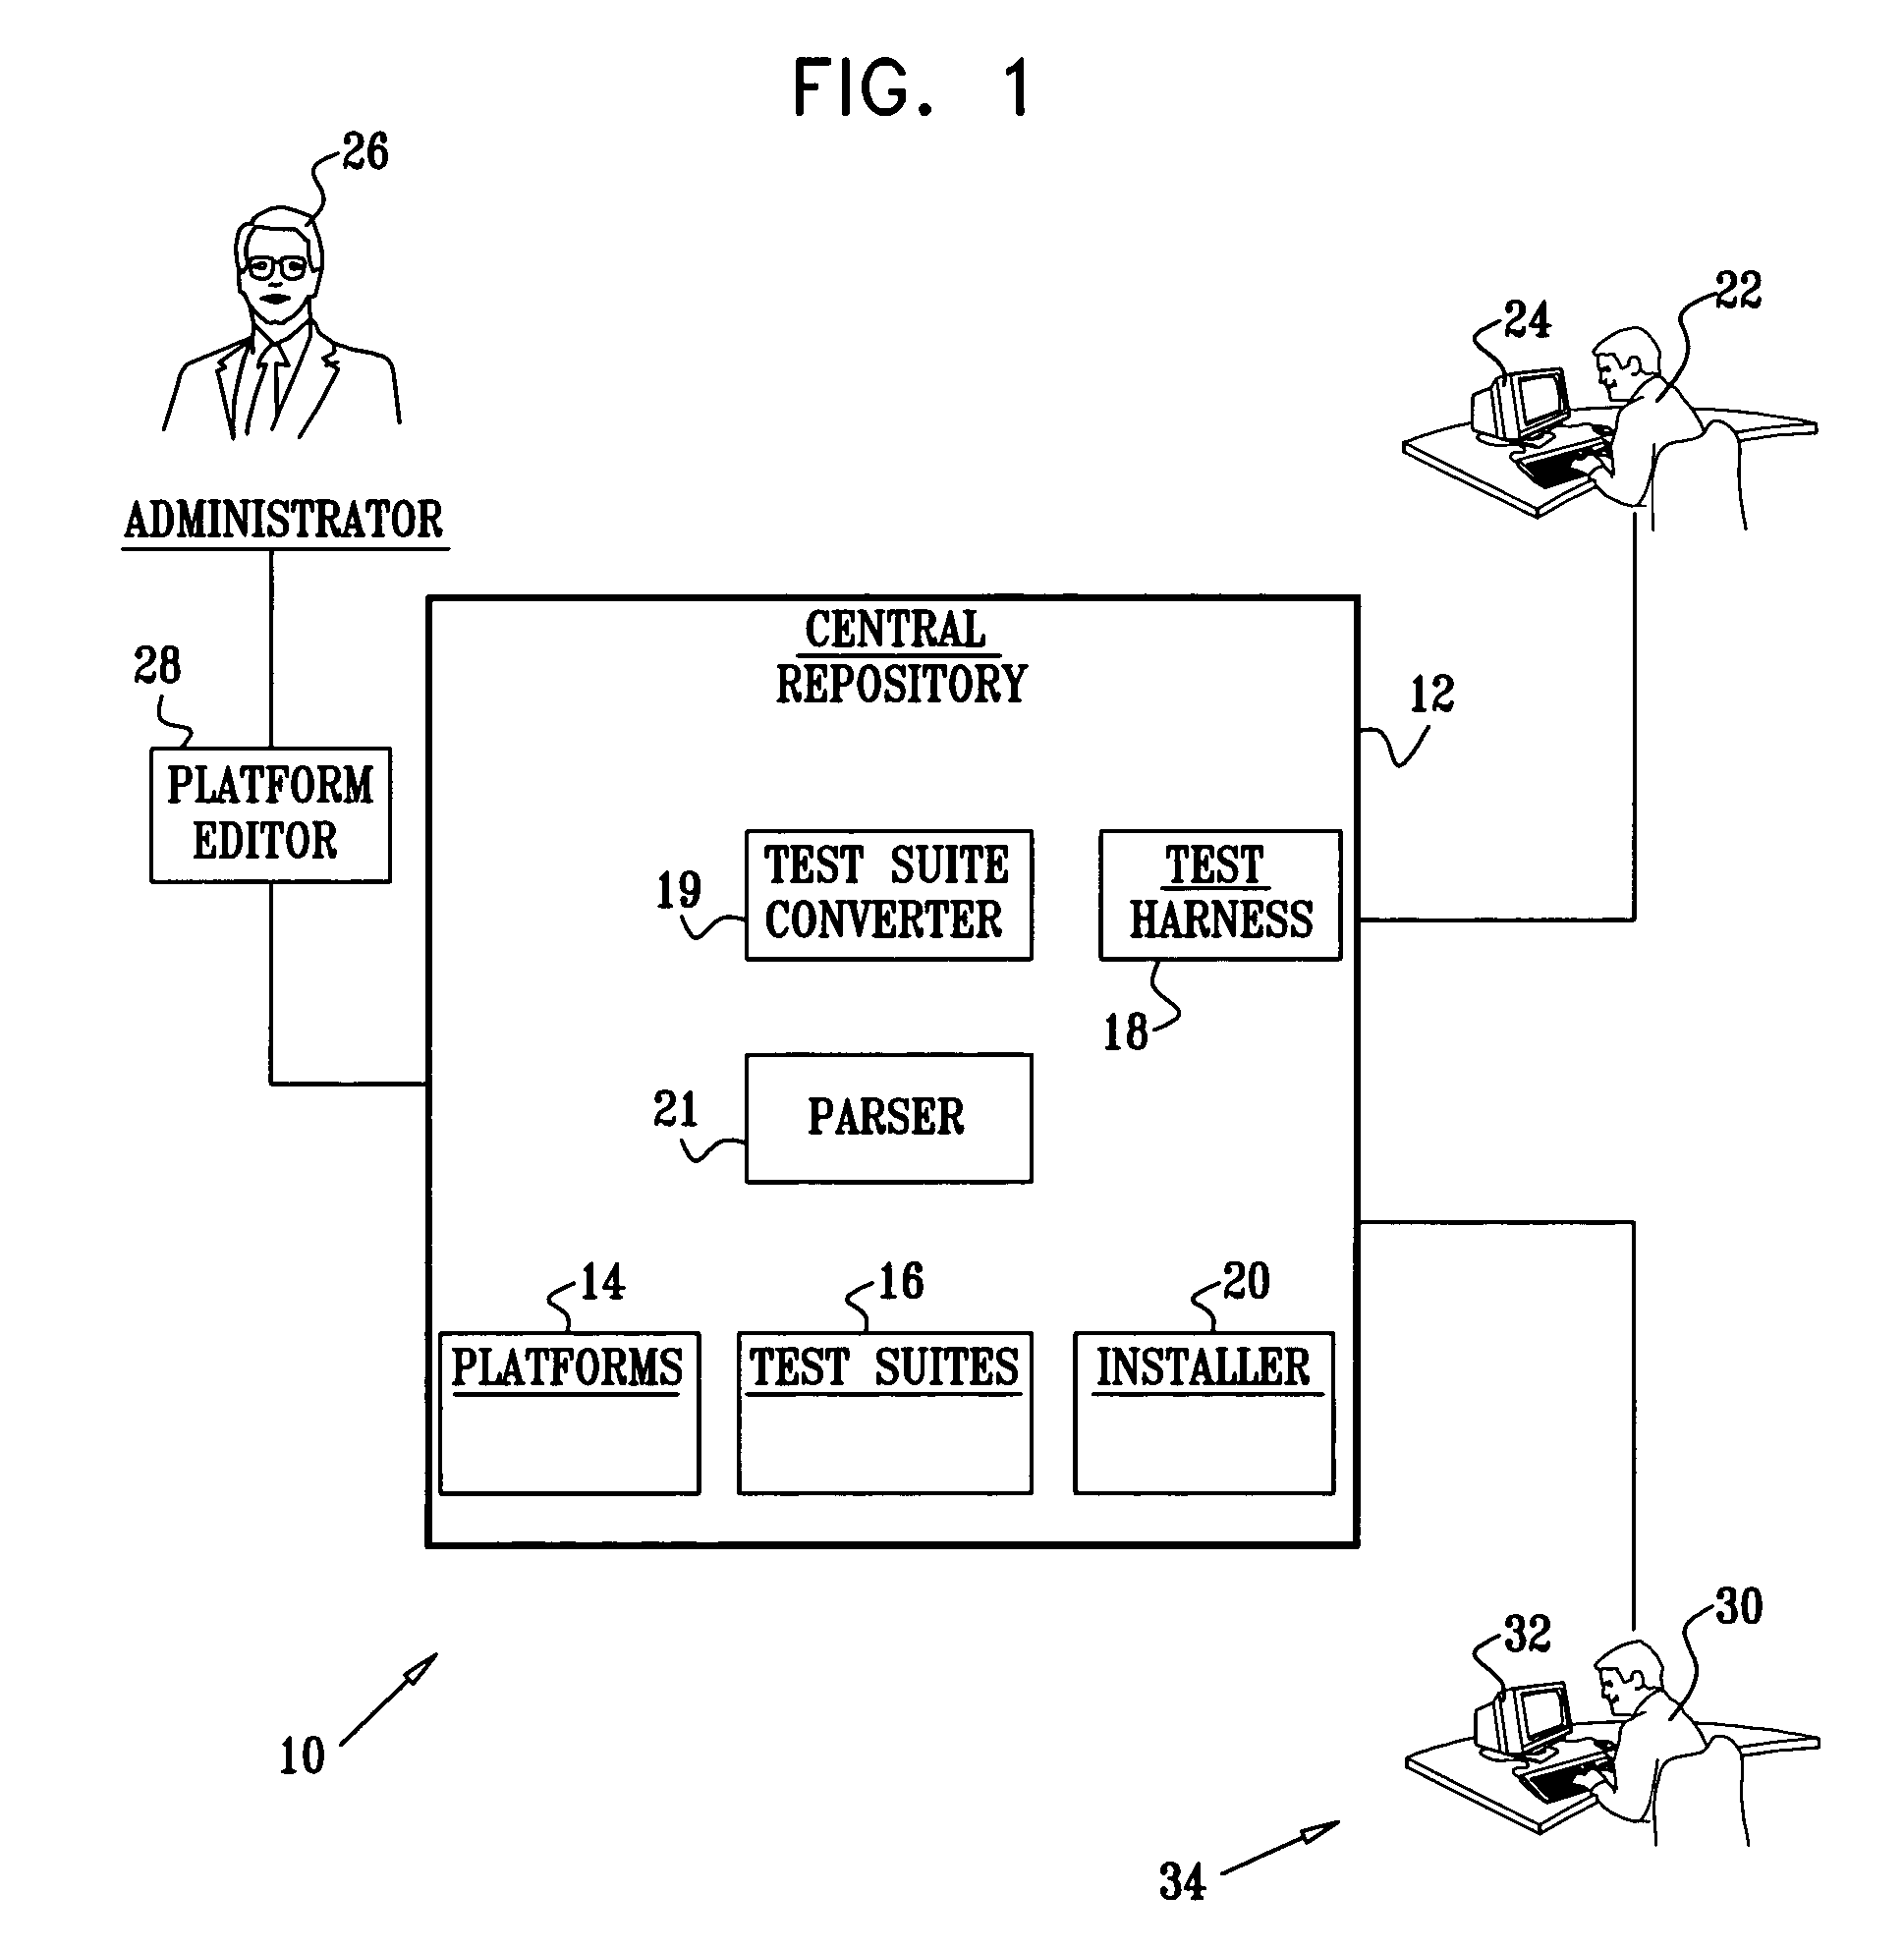 Mechanism for executing test suites written for different harnesses under one test execution harness